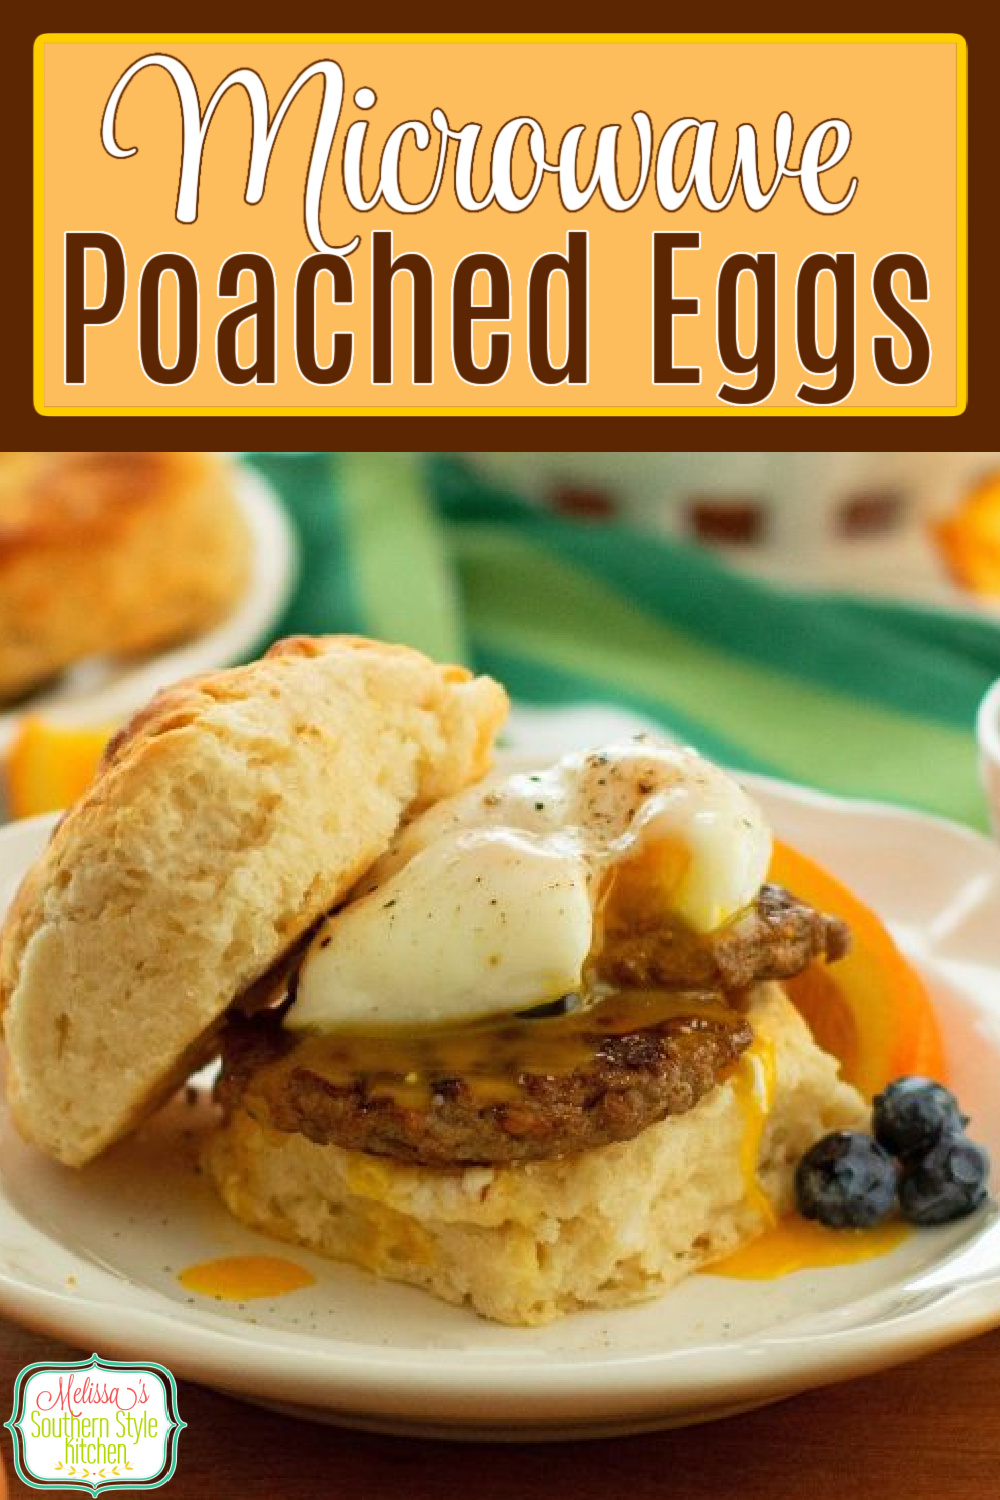 These easy Microwave Poached Eggs are certain to become a family favorite that anyone can make #poachedeggs #eggs #easyeggsrecipe #breakfastrecipes #brunchrecipes #poachedeggs #nofailpoachedeggs #howtopoacheggs via @melissasssk